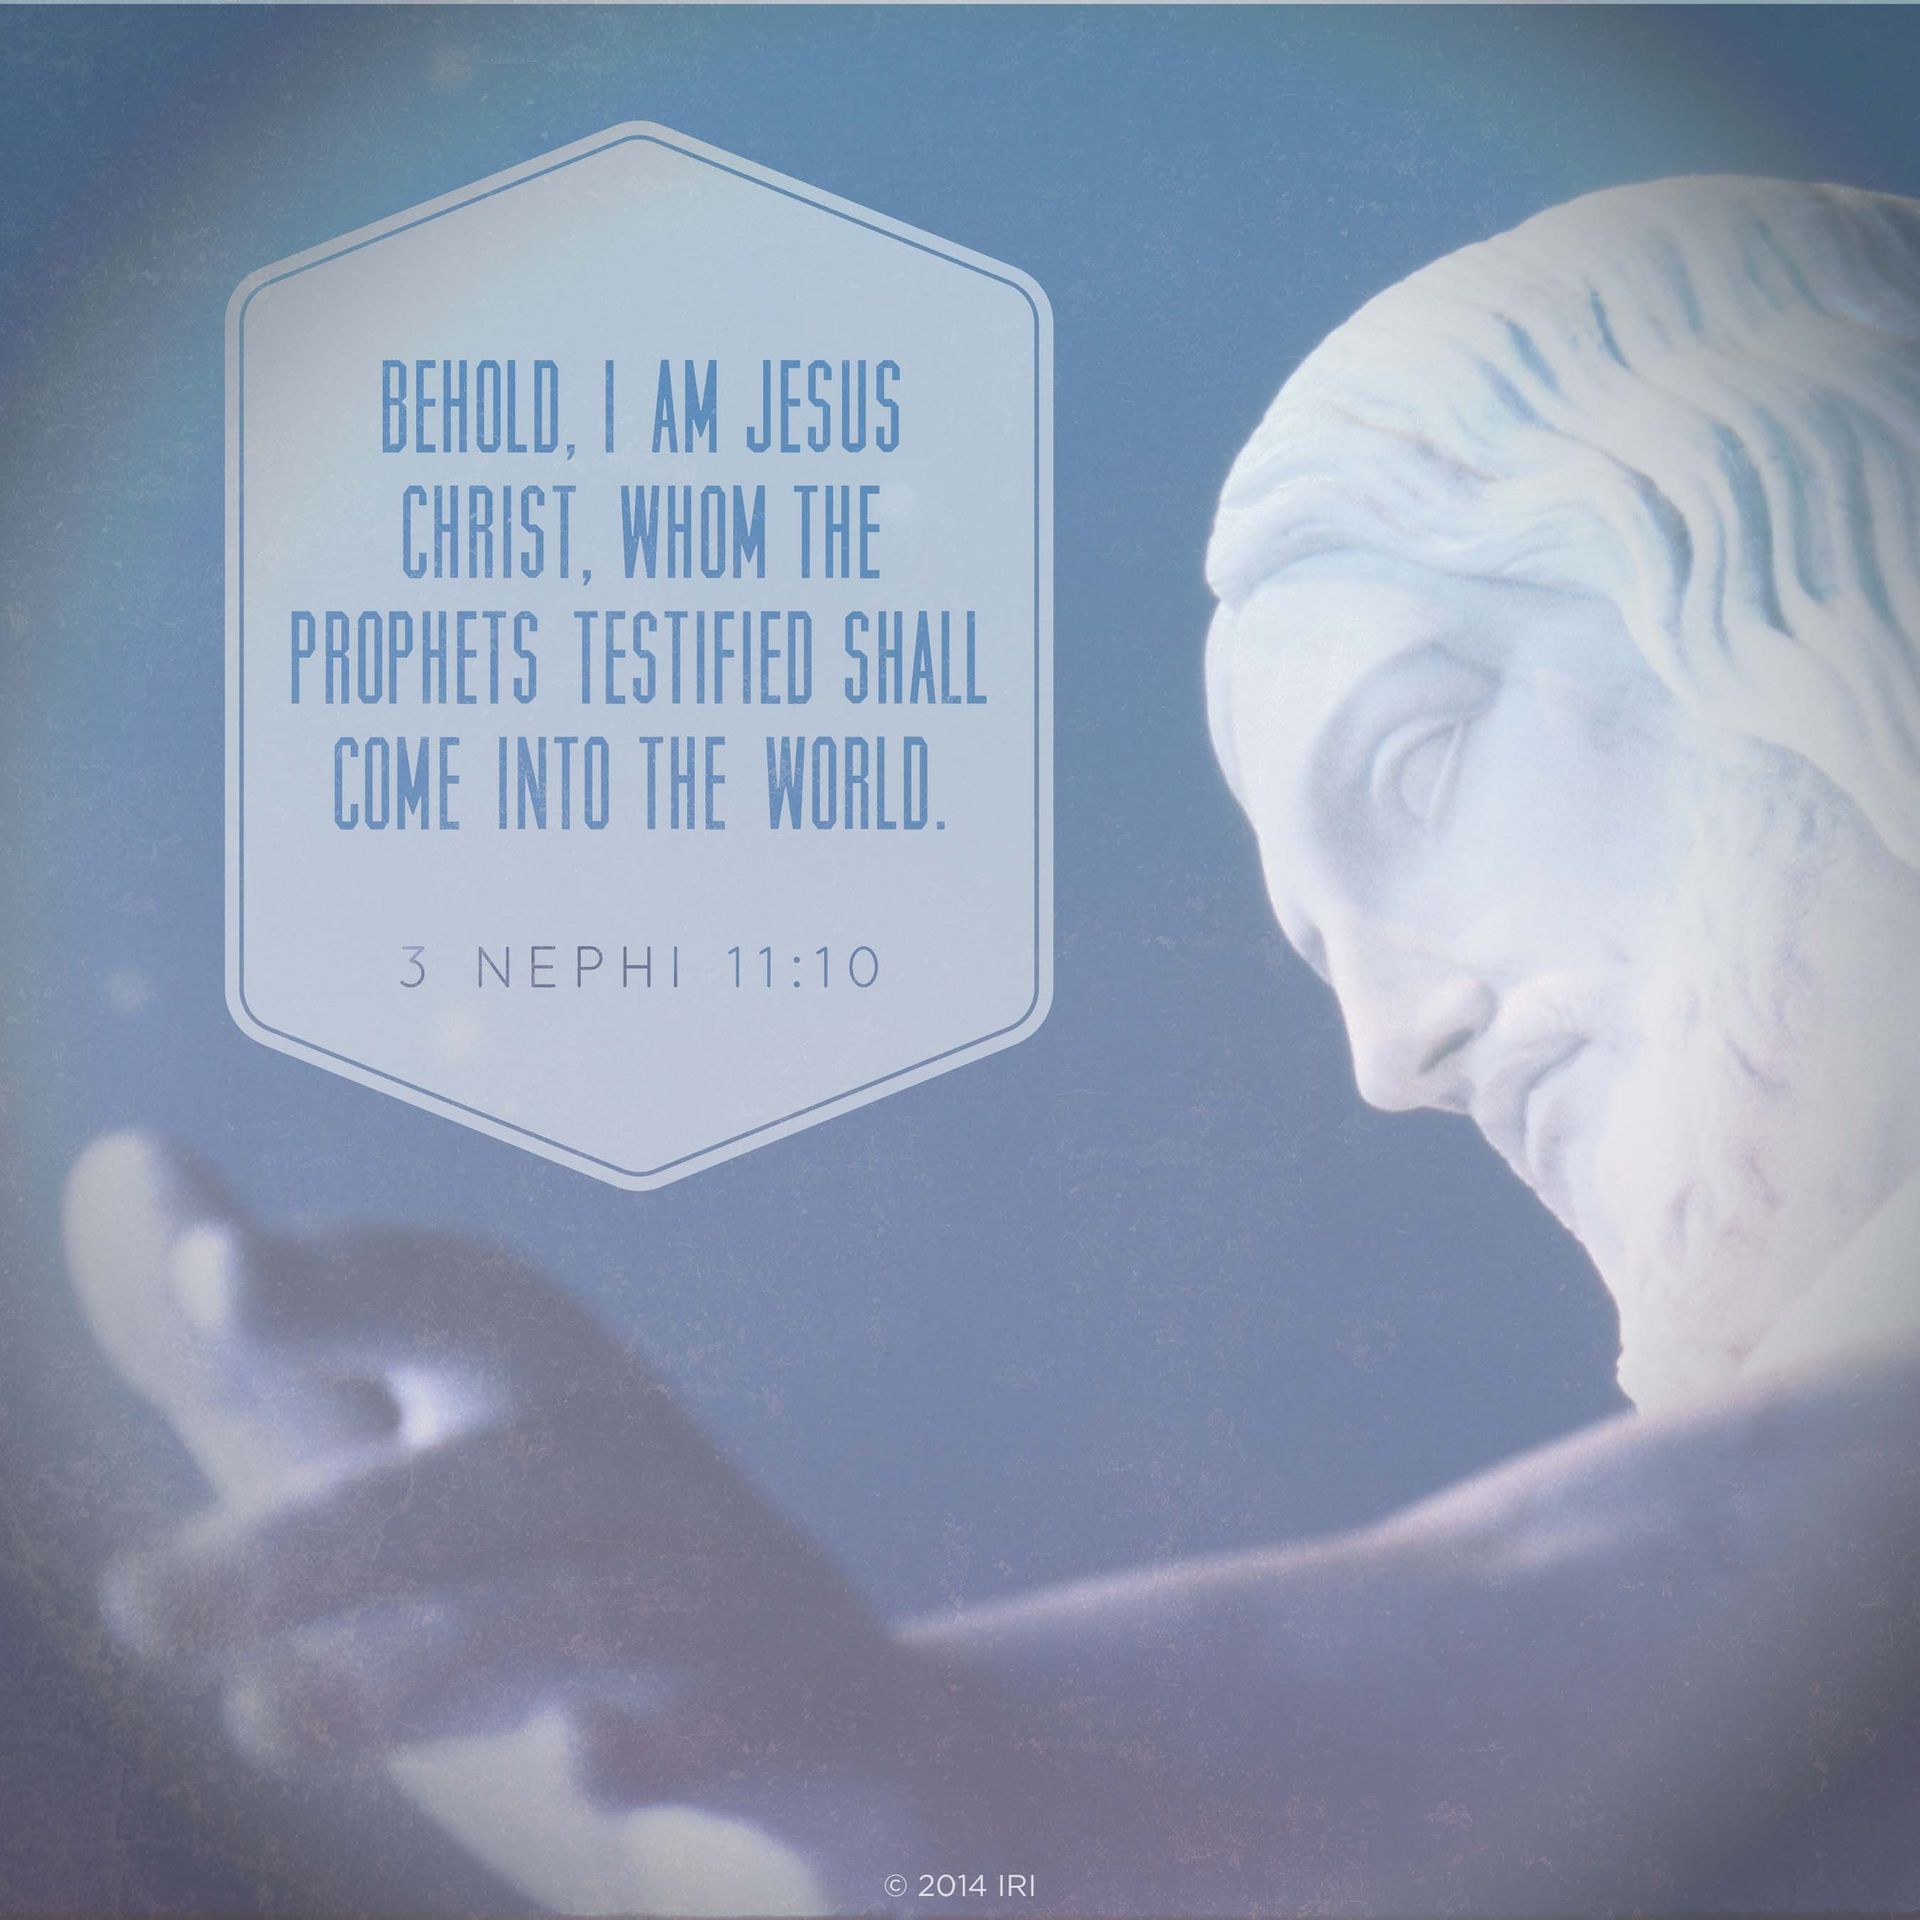 “Behold, I am Jesus Christ, whom the prophets testified shall come into the world.”—3 Nephi 11:10